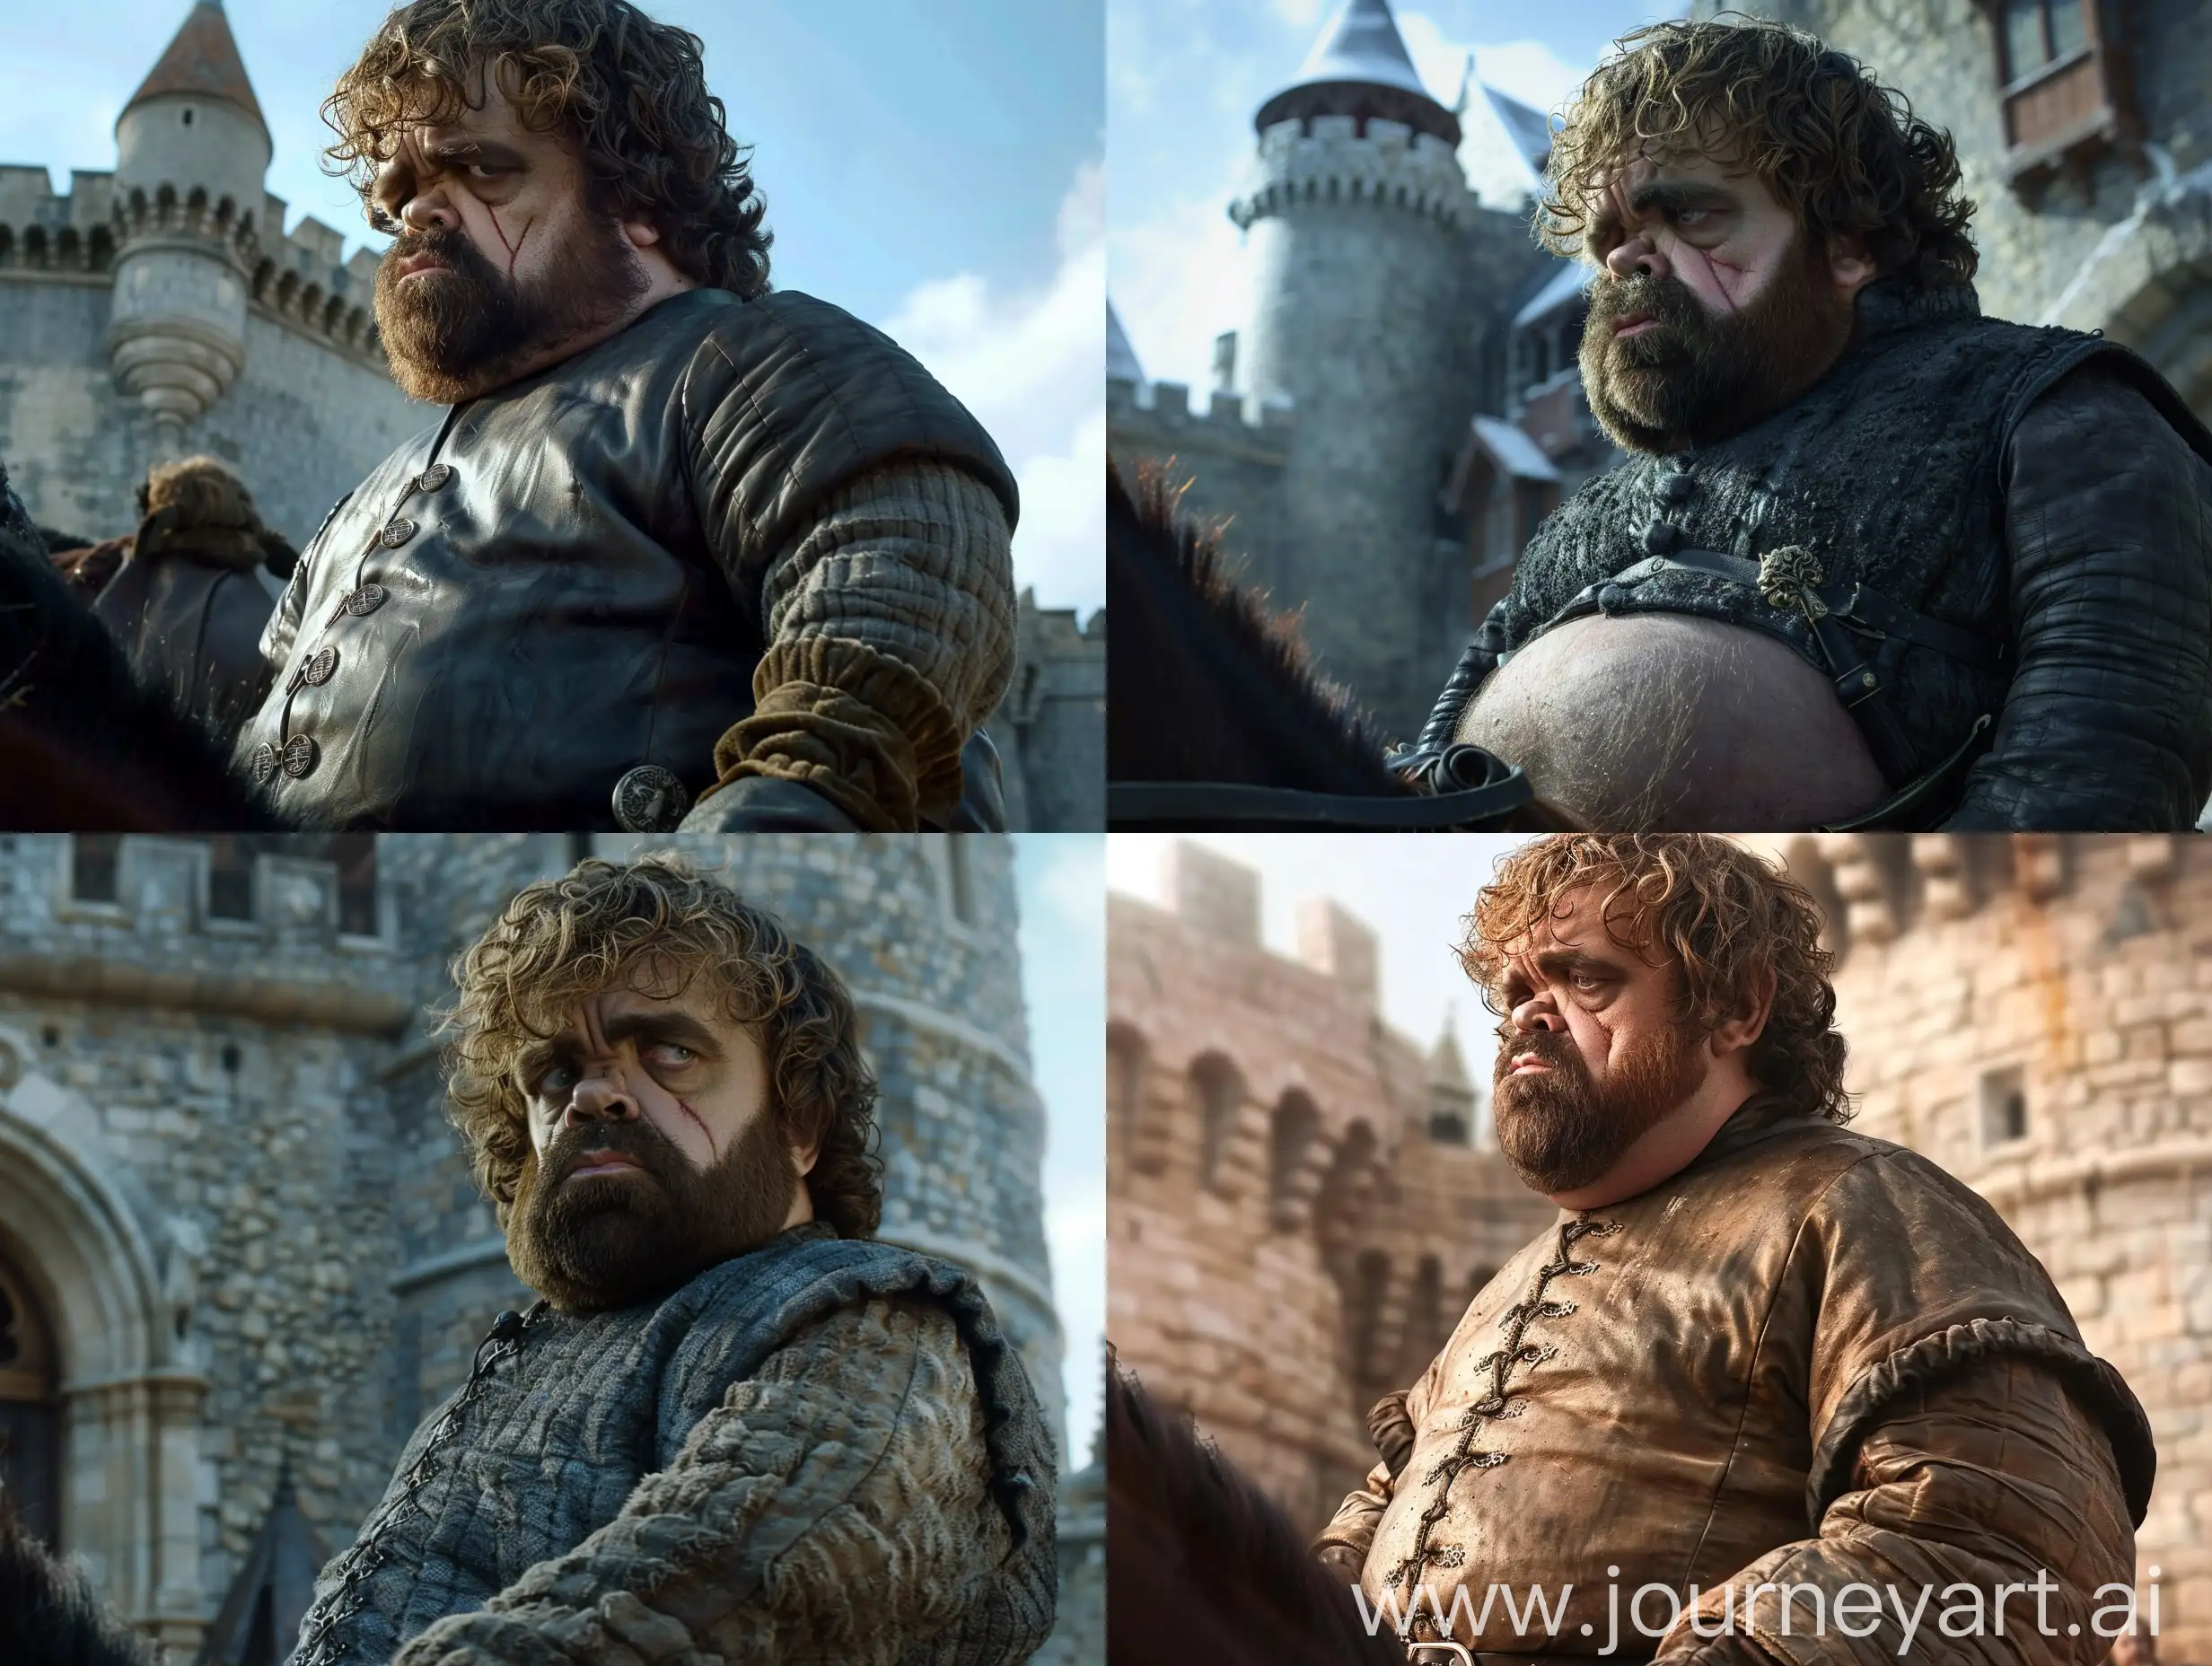 Tyrion Lannister in Game of Thrones, Tyrion Lannister is very fat, Tyrion Lannister's face and body are very fat, Tyrion Lannister tries to ride his horse, the camera captures the fat Tyrion Lannister from the side, the camera emphasizes his enlarged frame, The background is Winterfell Palace, the style of Witcher, the lighting is classic style, realistic, clear, q2